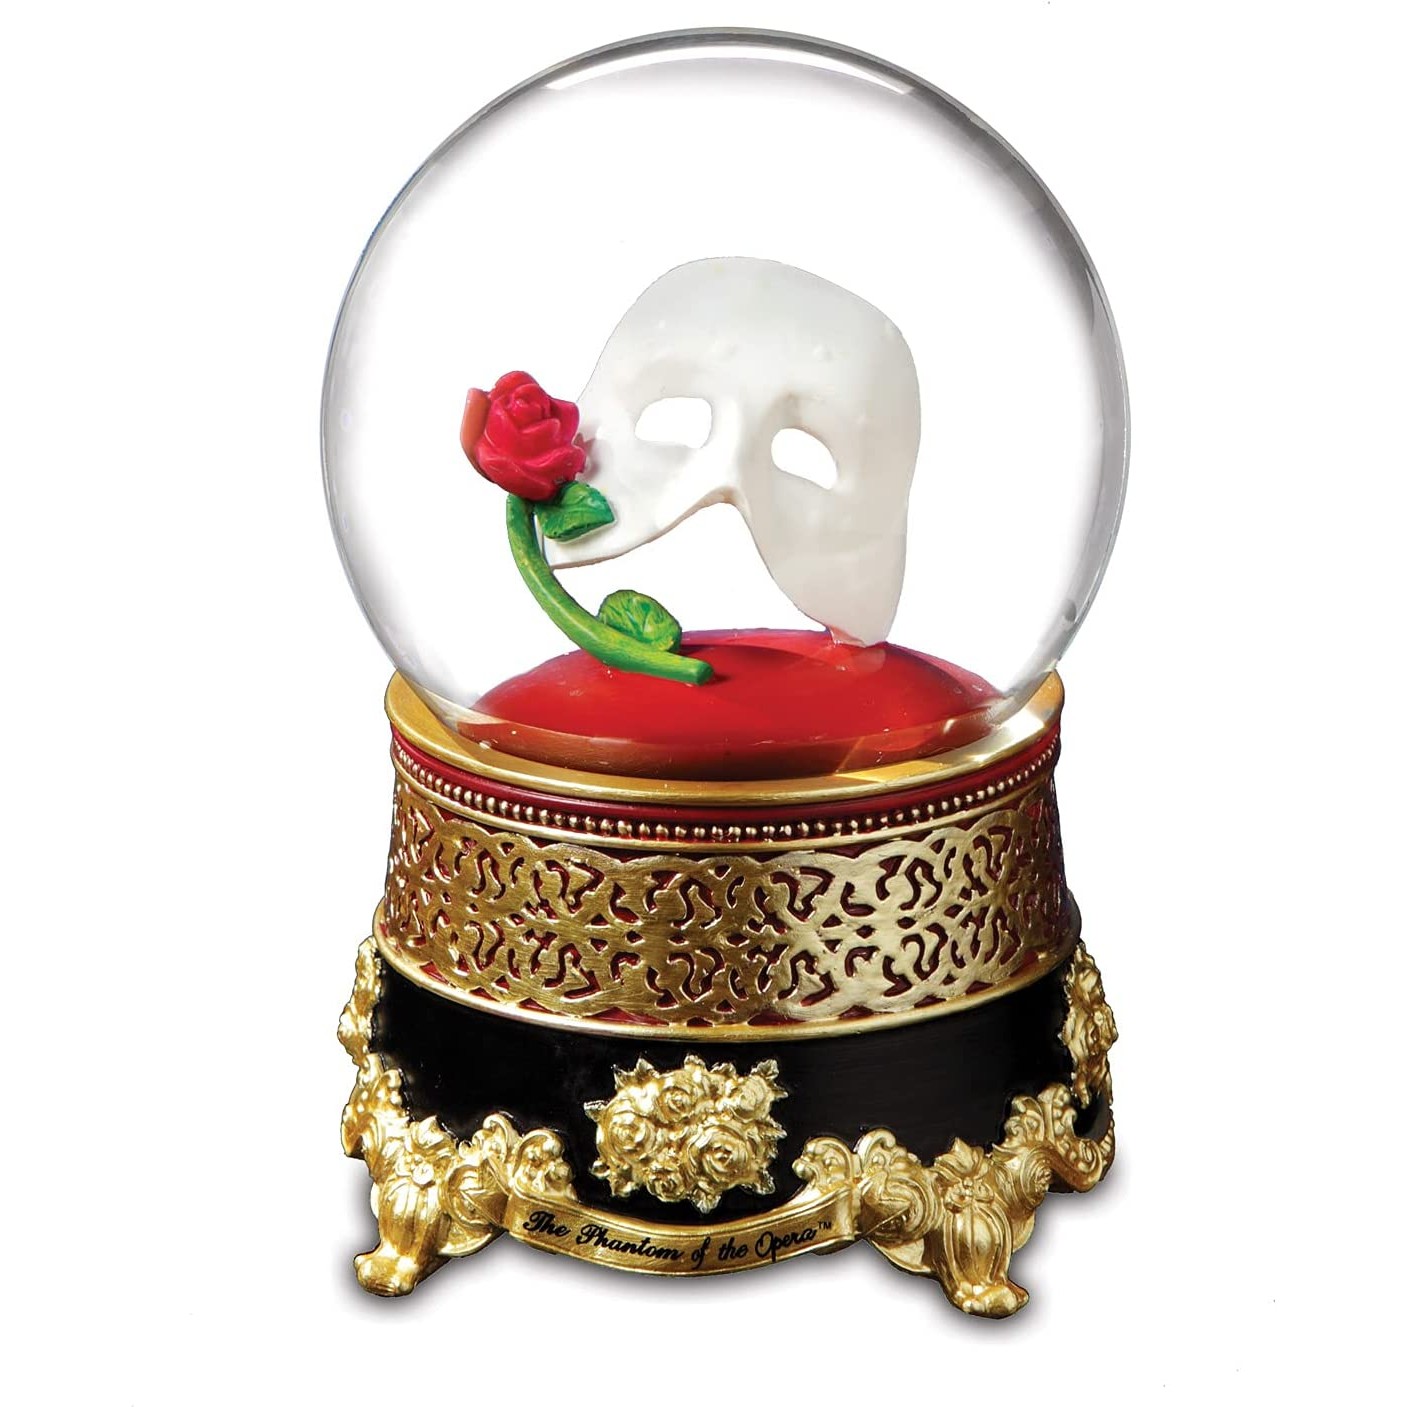 The Phantom of The Opera Water Globe with the Classic Mask and Rose Inside the Globe.